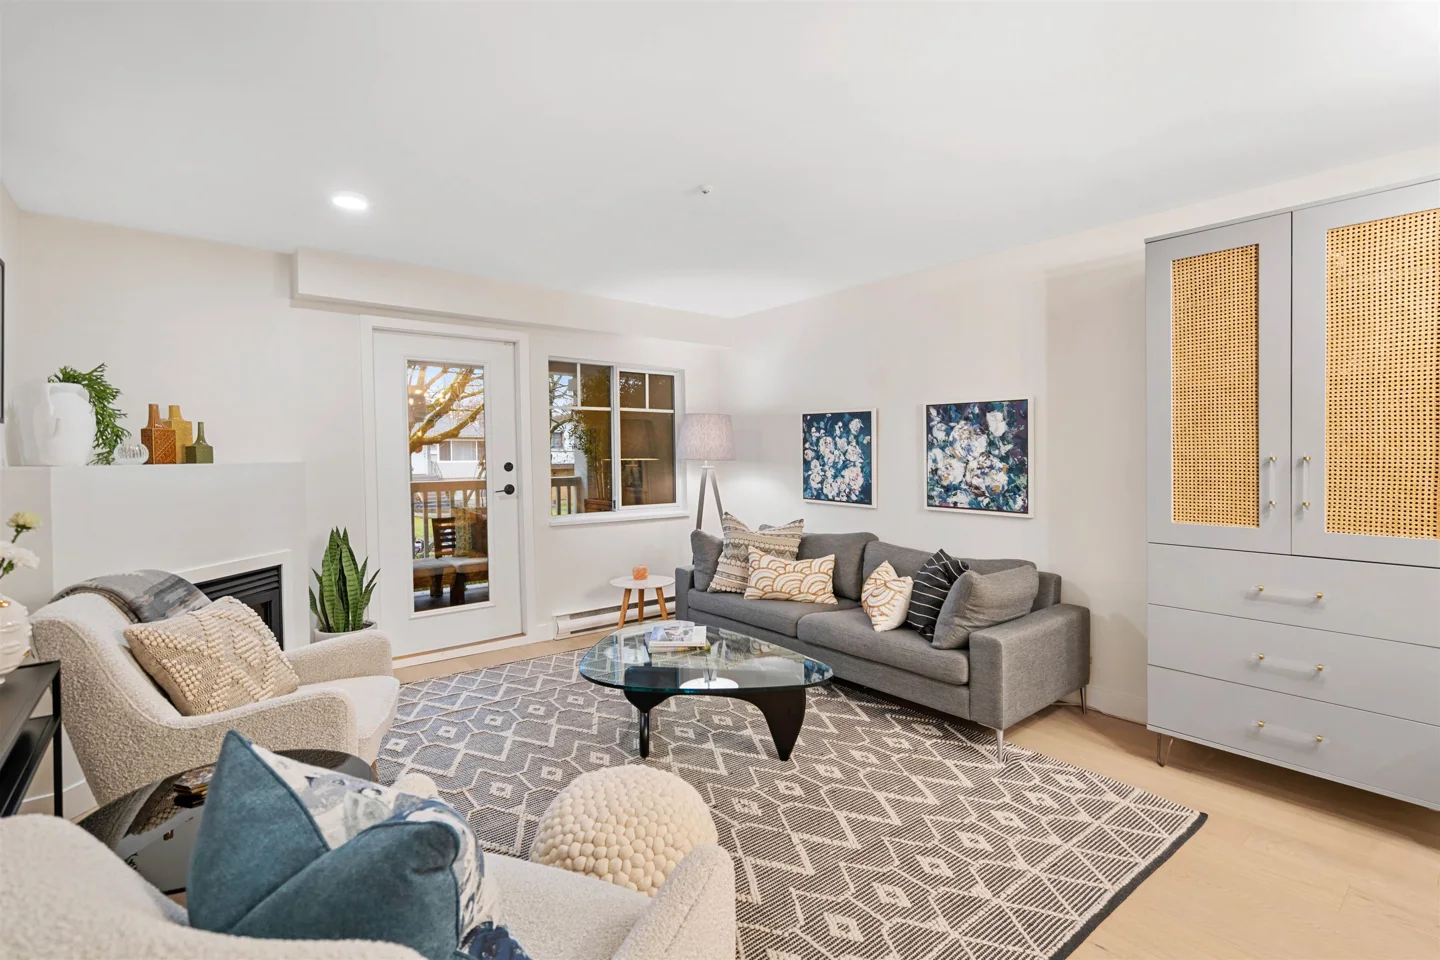 Elegantly Renovated Two-Story Townhome!